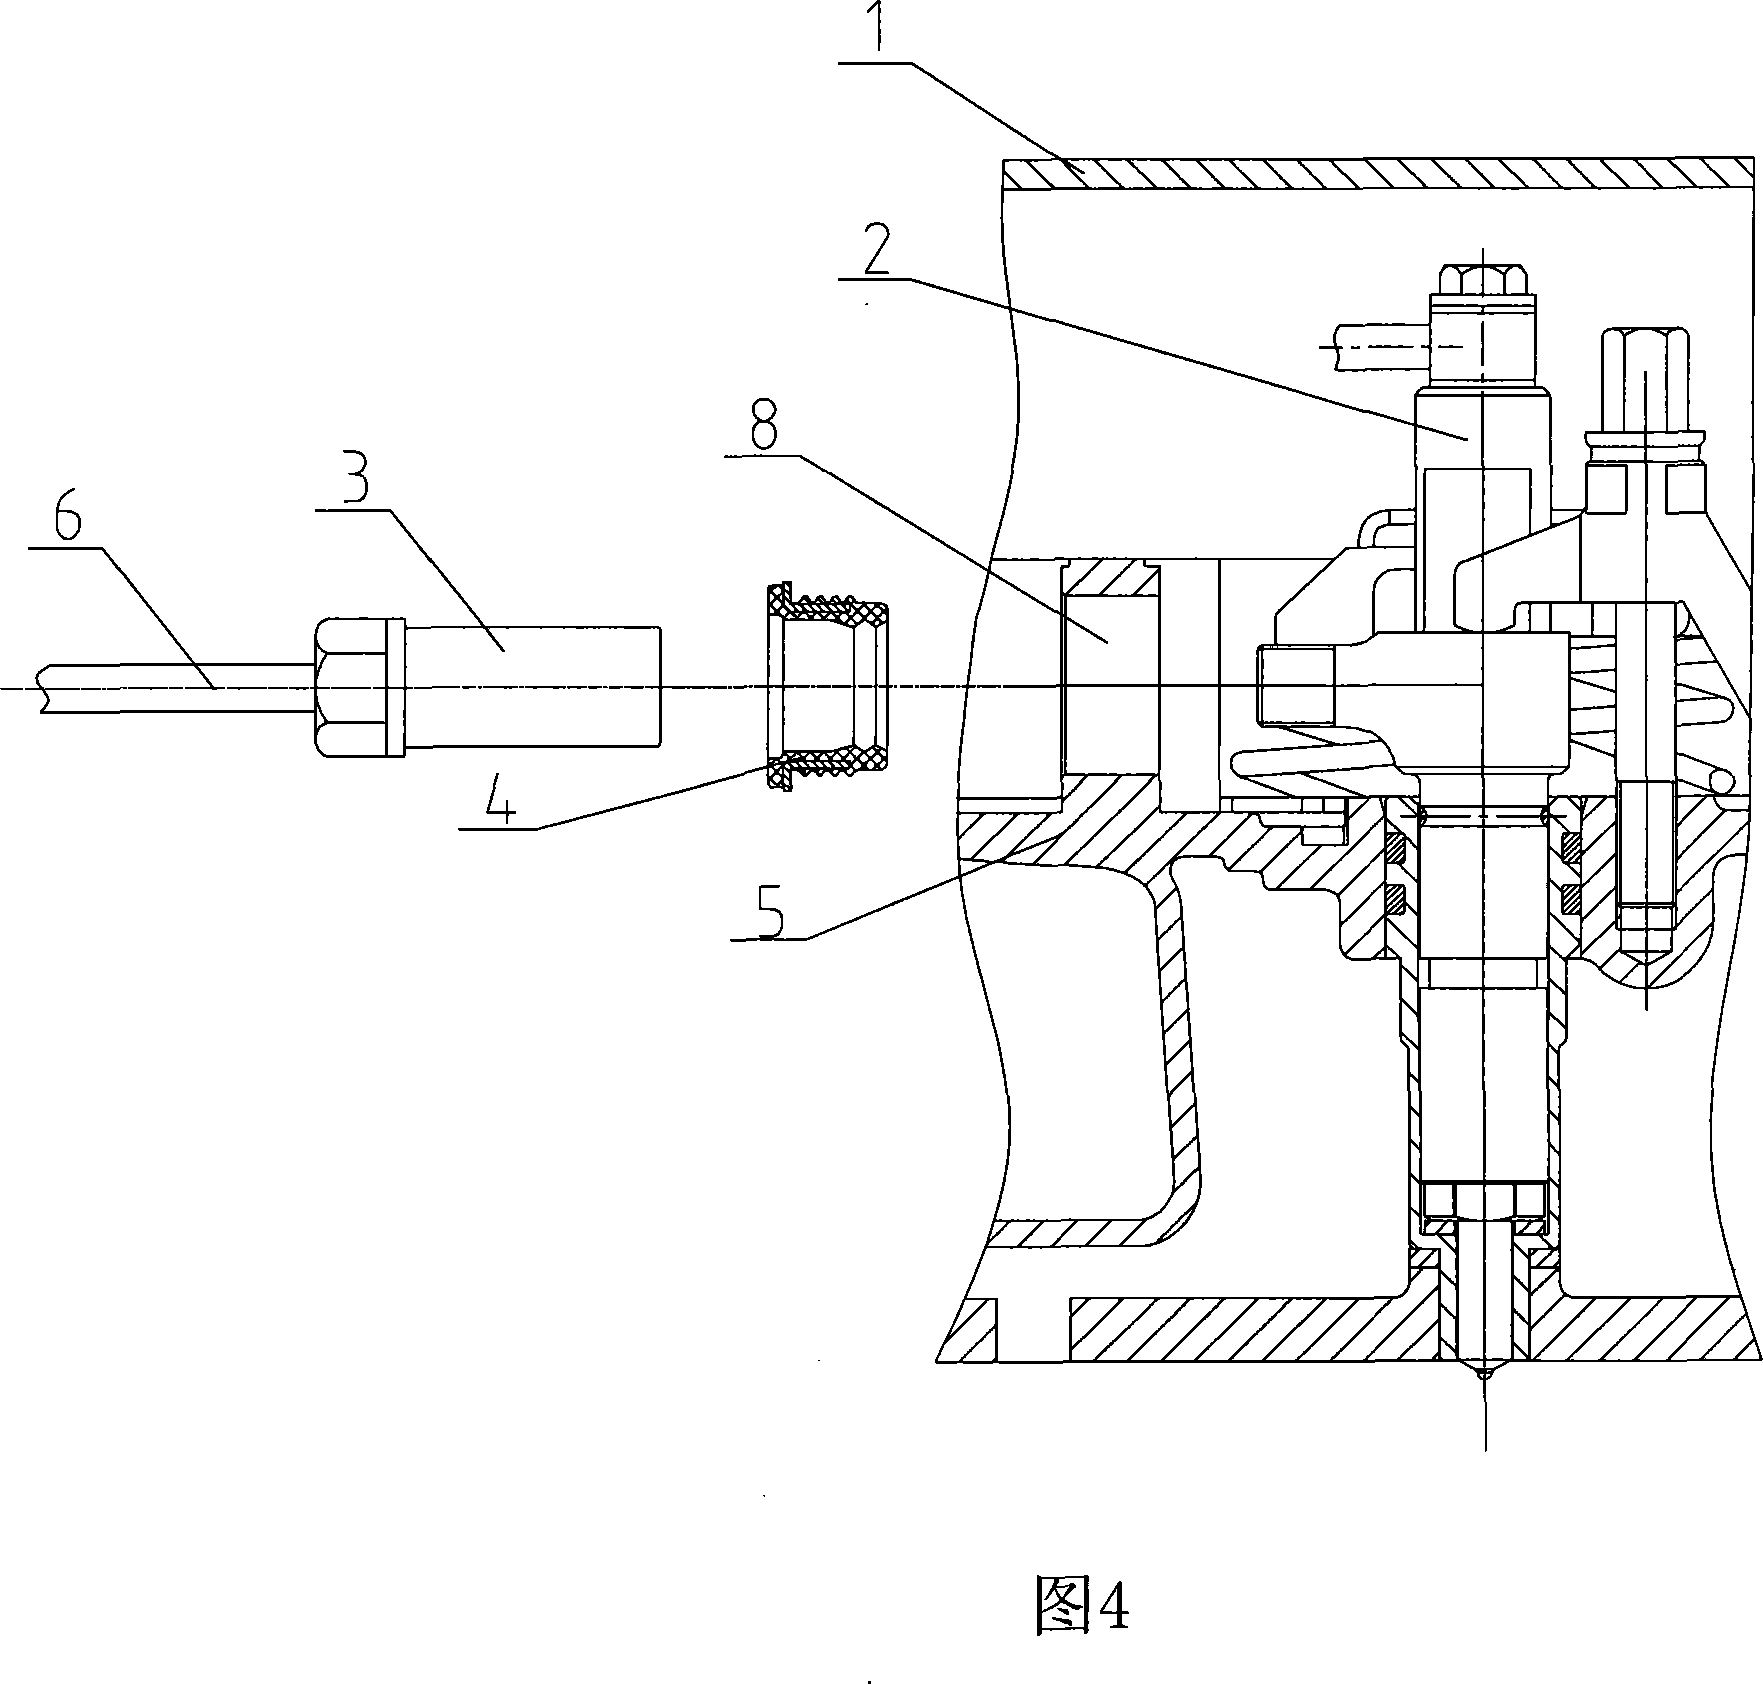 Diesel engine fuel injector mounting structure